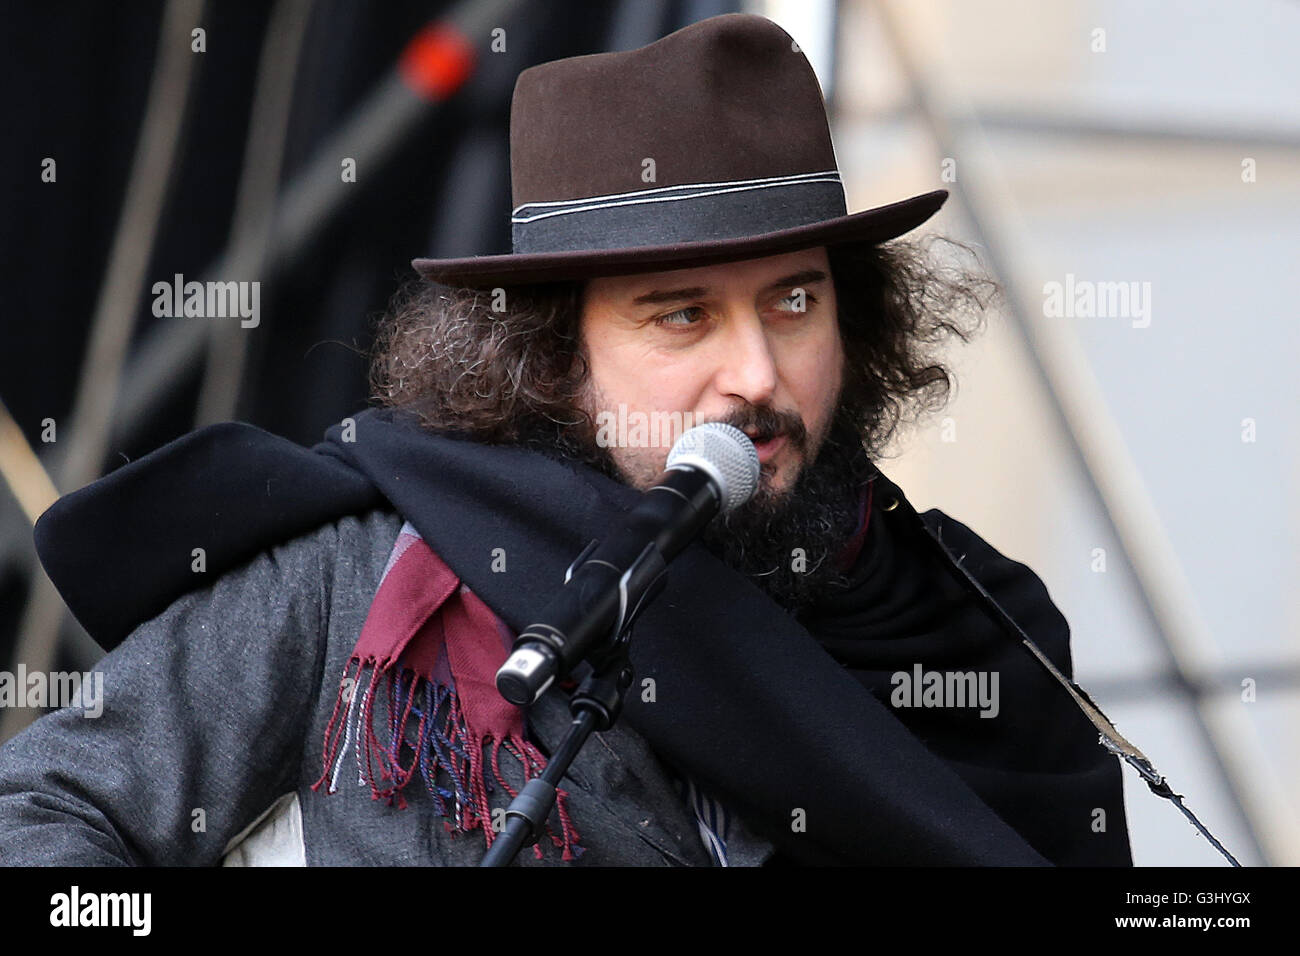 The singer Vinicio Capossela during rehearsals in San Carlo Square in Turin for New Year's concert. Vinicio Capossela is an Italian singer-songwriter. His style is strongly influenced by US singer and songwriter Tom Waits, though it also draws from the traditions of Italian folk music. Stock Photo